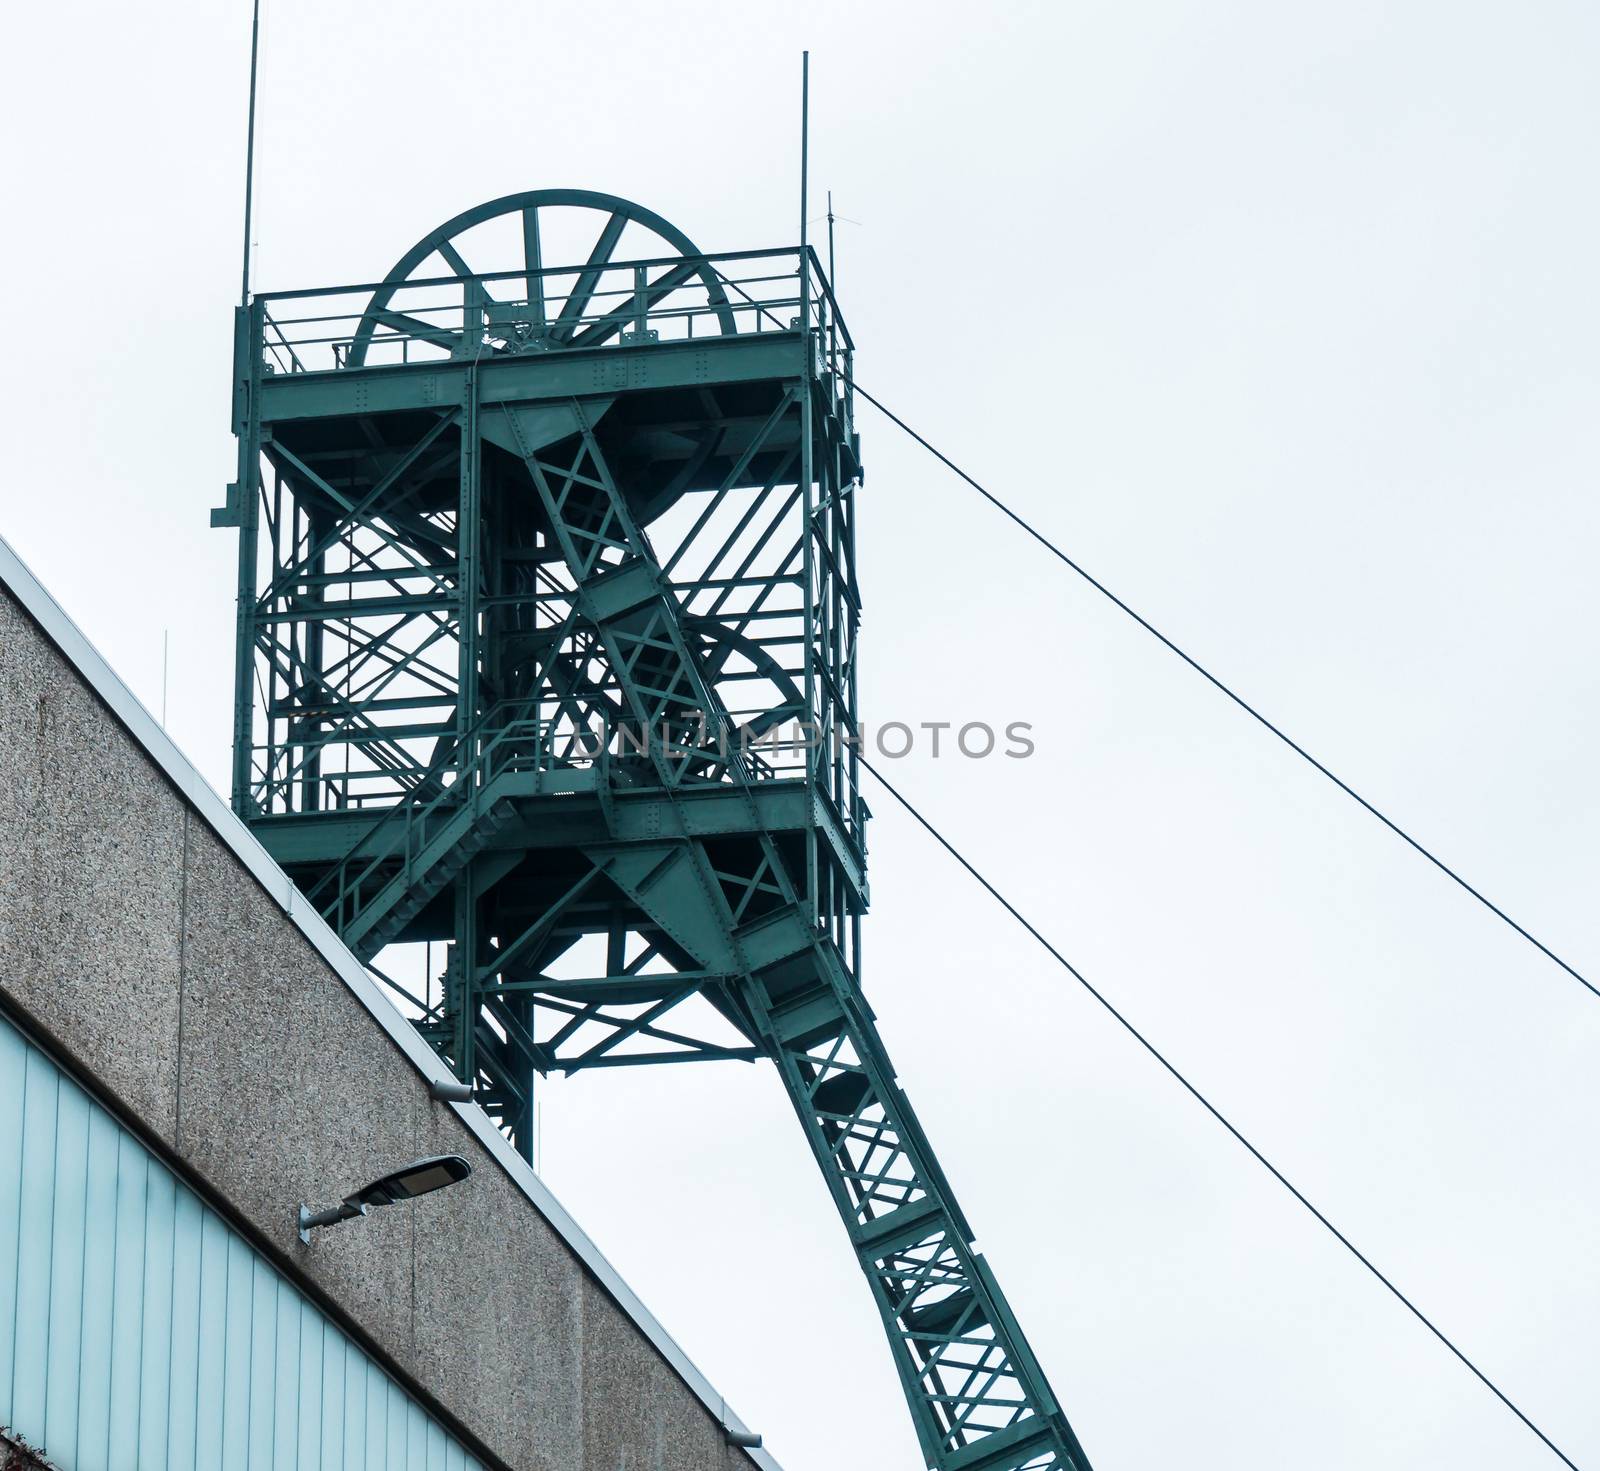 Mining tower of the "Asse" mine, a research mine for radioactive waste near Wolfenbuettel in Lower Saxony Germany, grey sky